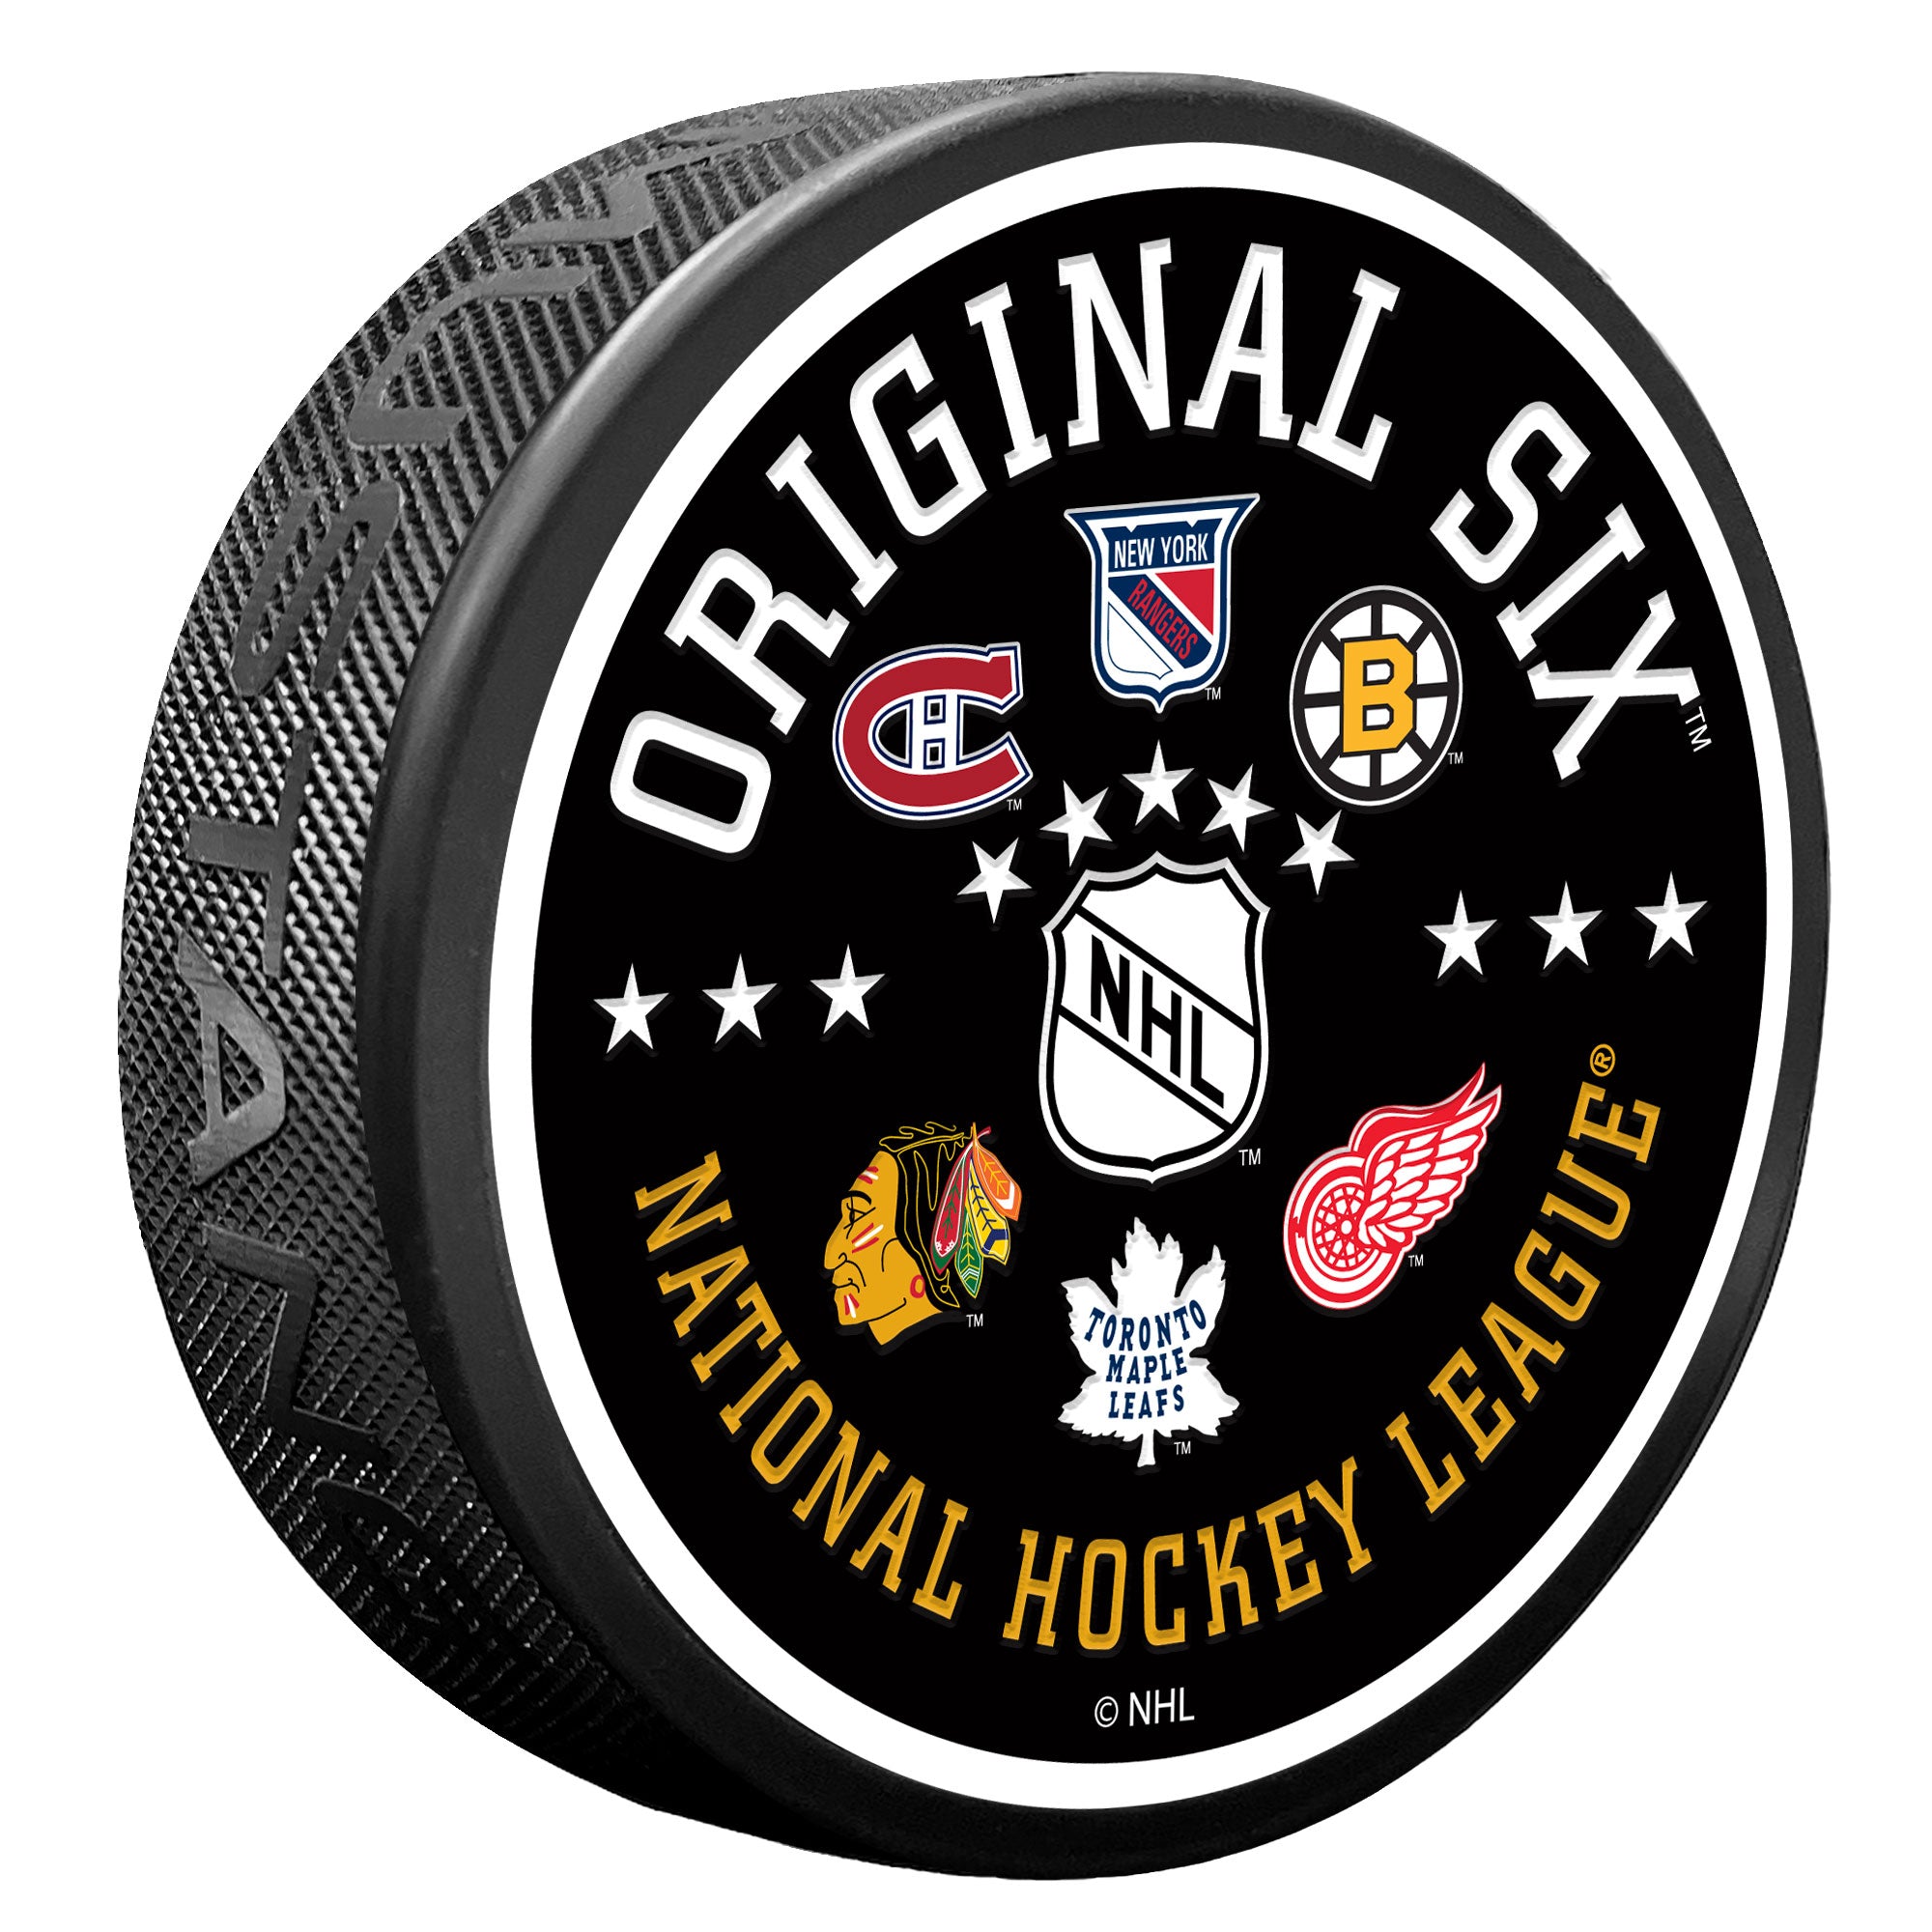 Detroit Red Wings - Original 6 Puck – Hockey Hall of Fame